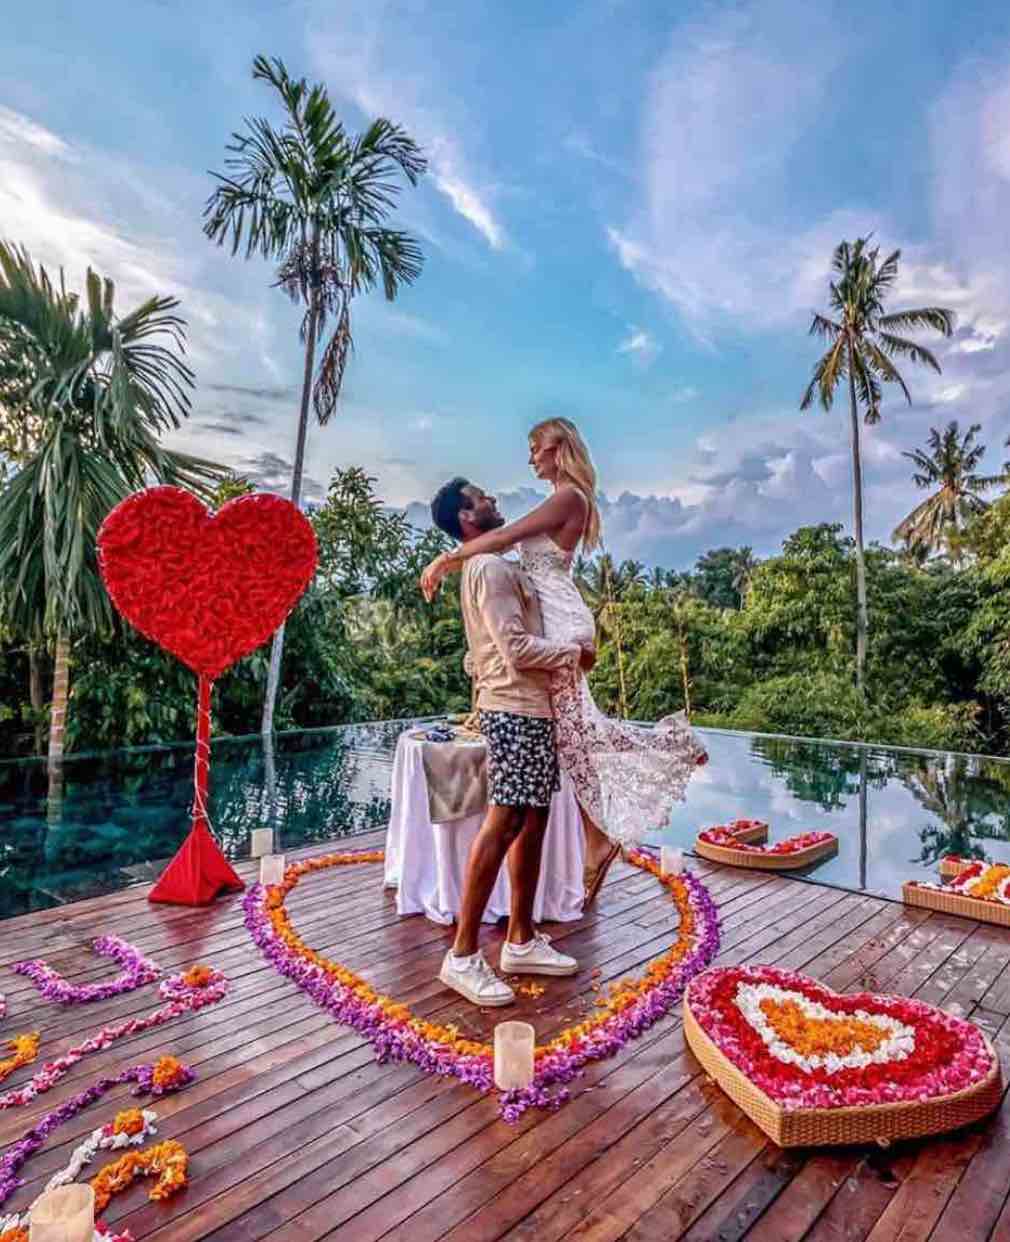 what do do in bali for couples